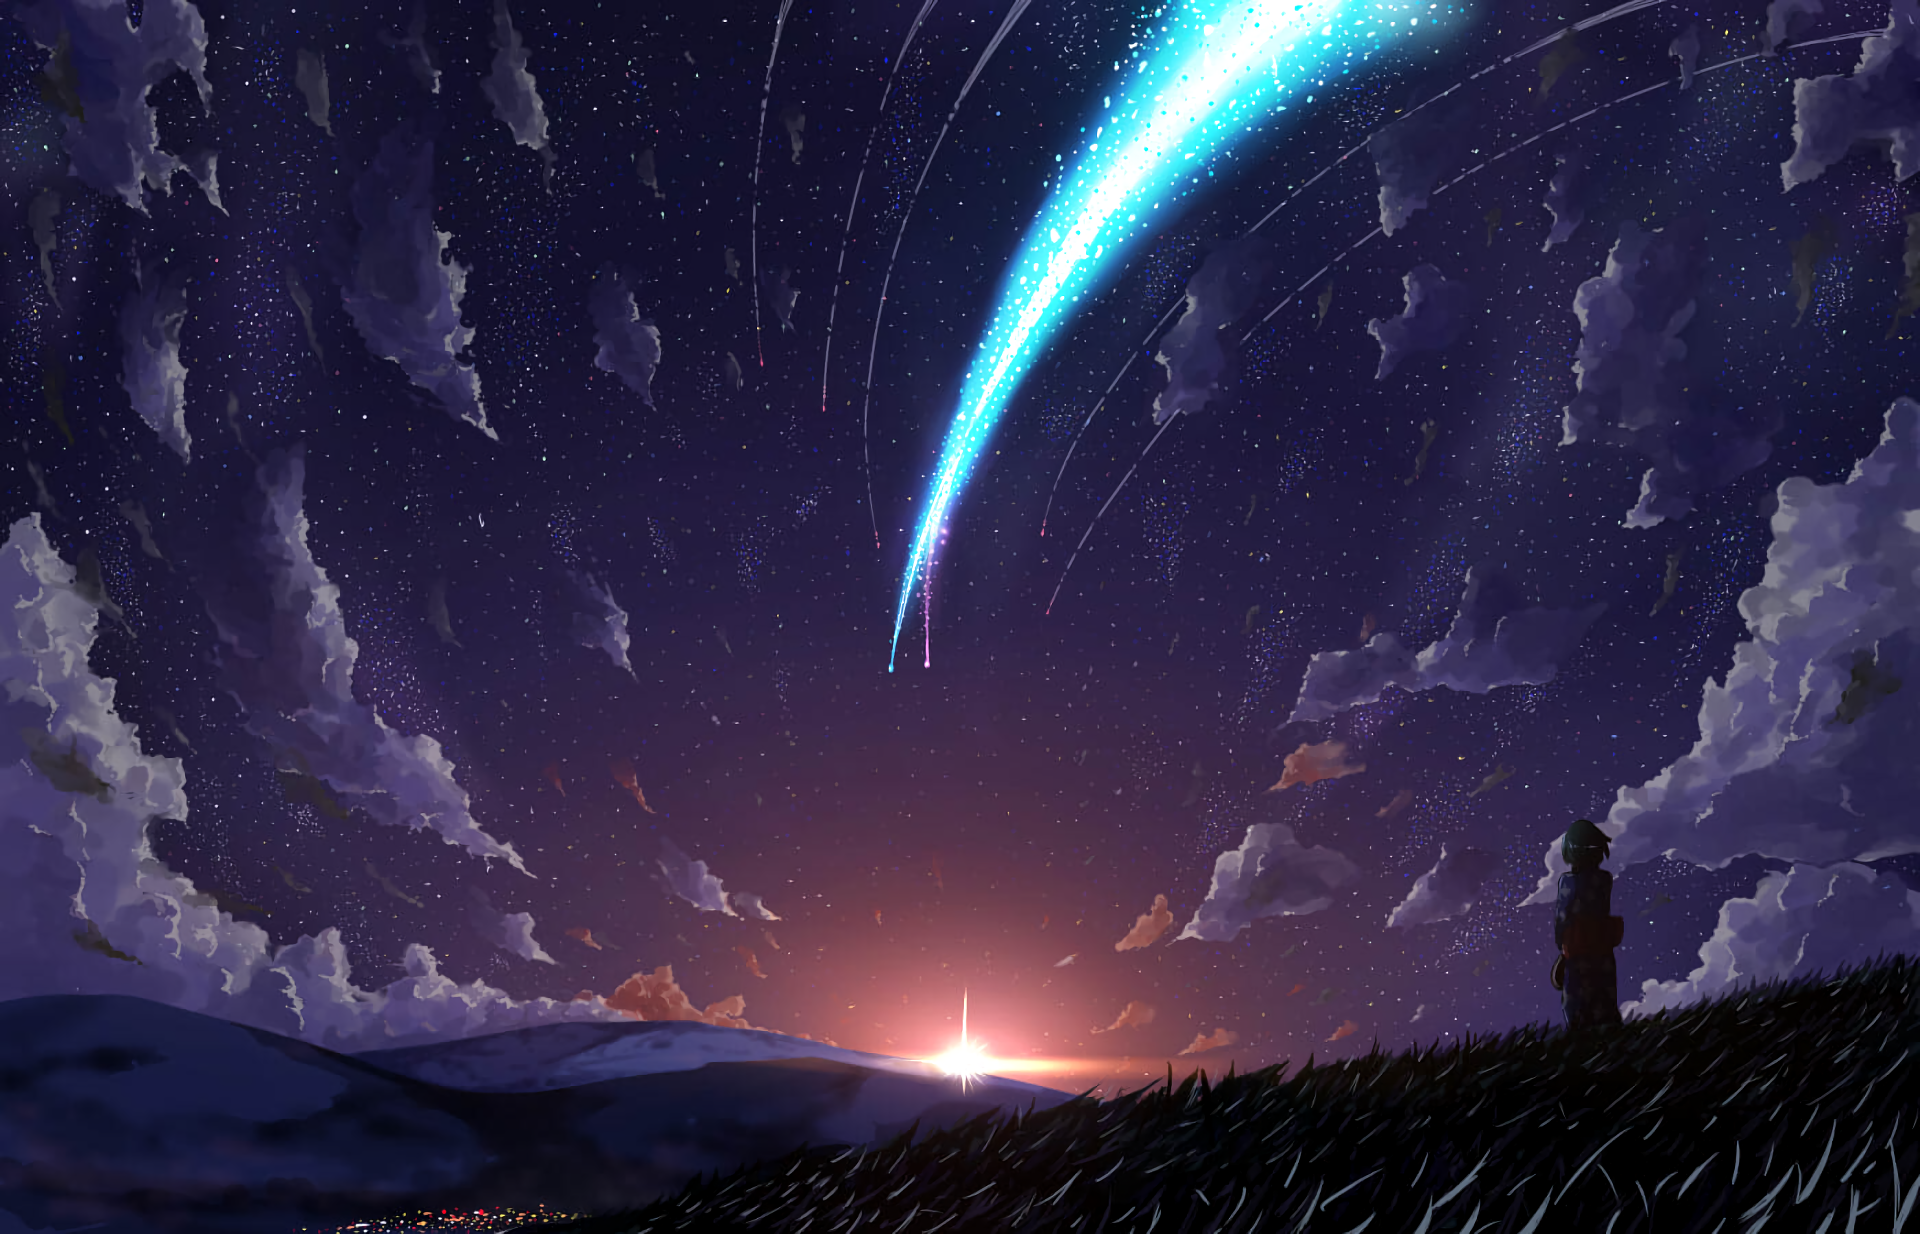 Your Name. HD Wallpaper | Background Image | 1920x1234 | ID:746386 - Wallpaper Abyss